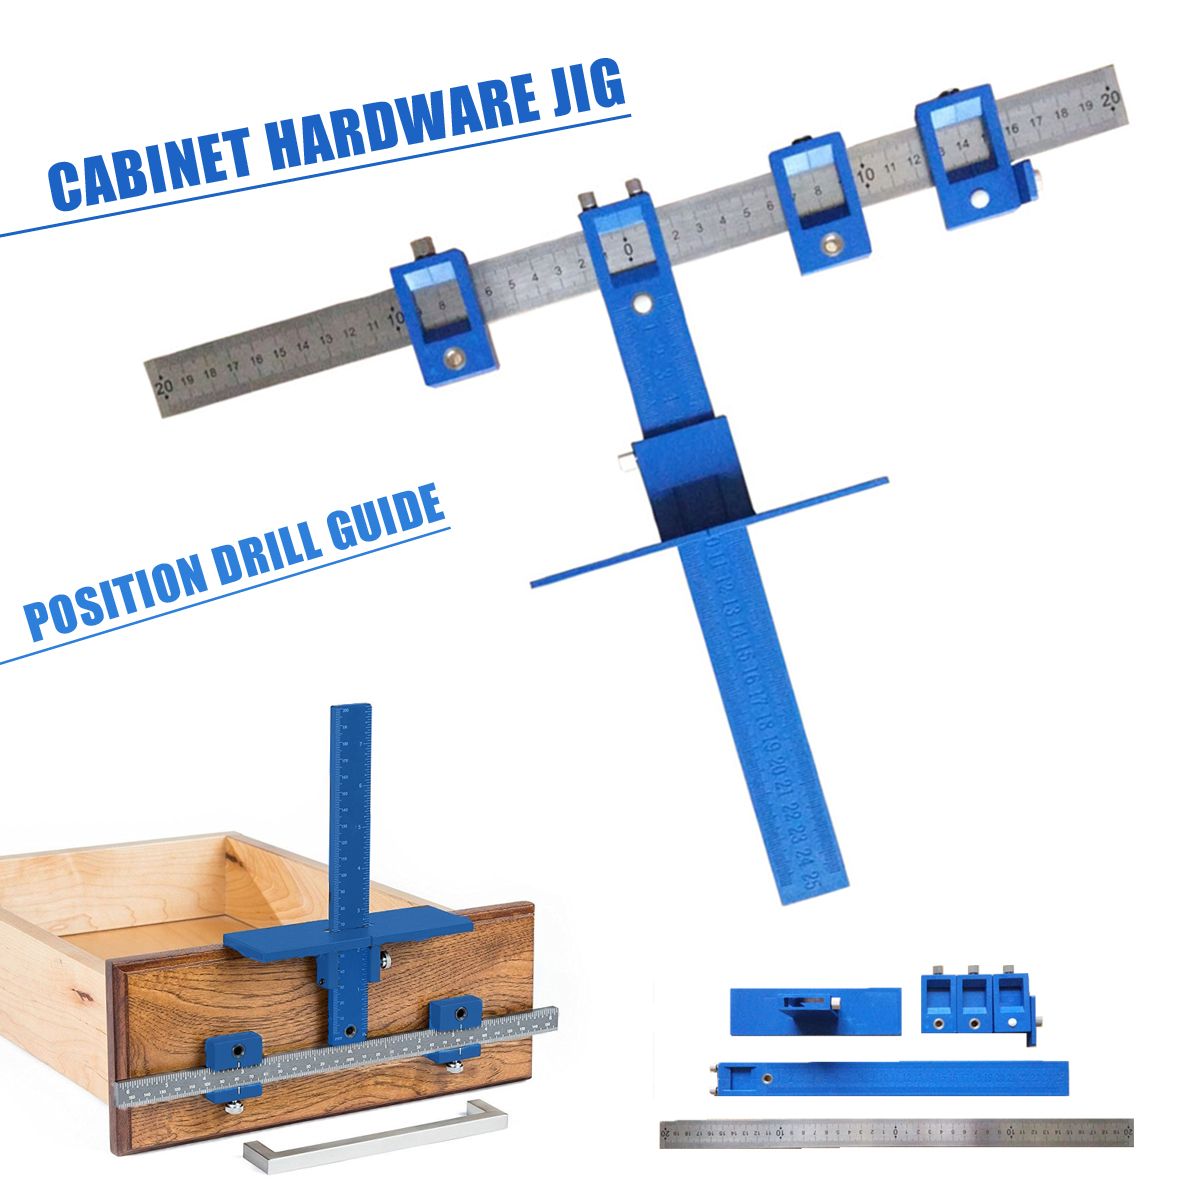 True-Position-Drill-Guide-Cabinet-Hardware-Jig-for-Wooden-Working-Woodworking-Tools-1350058